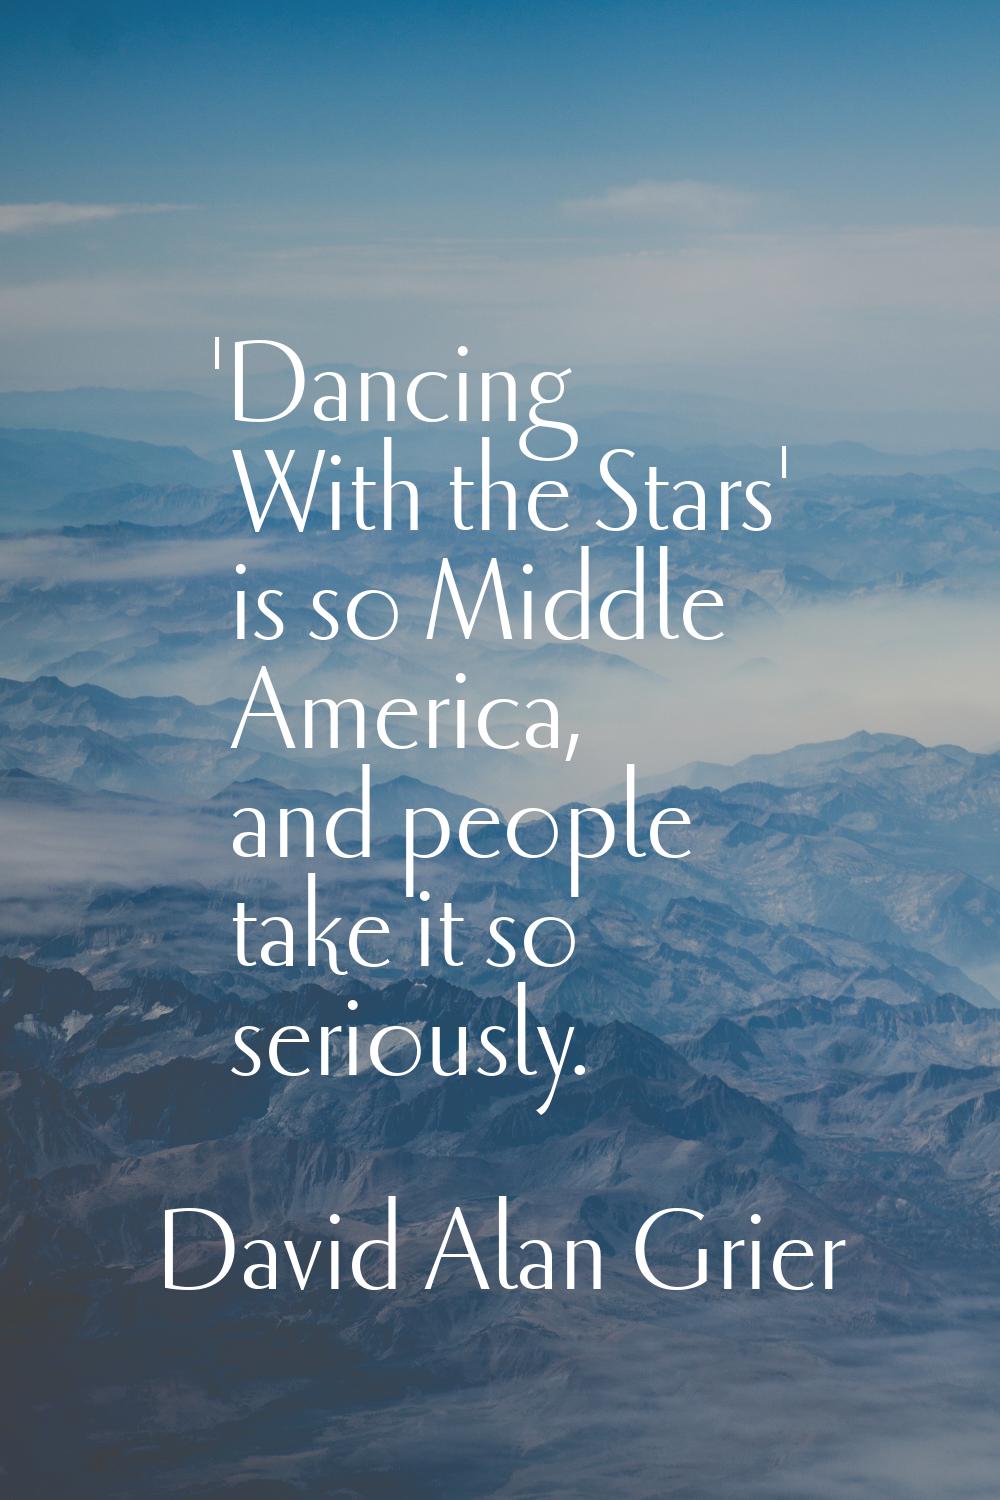 'Dancing With the Stars' is so Middle America, and people take it so seriously.